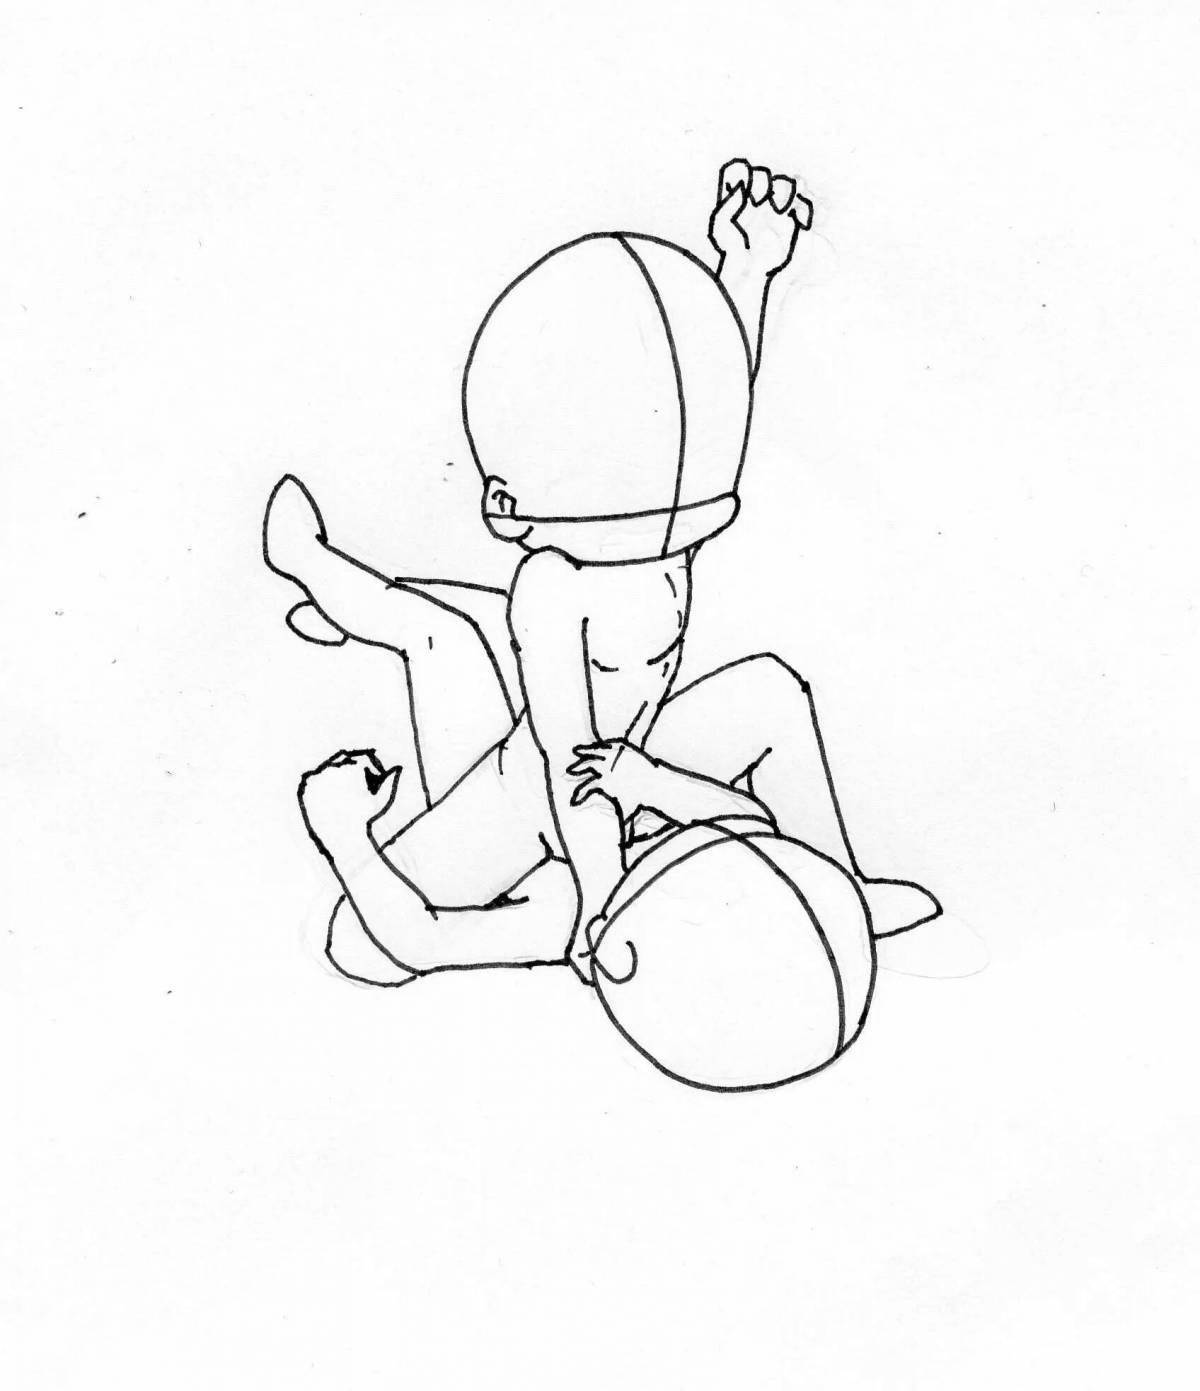 Glowing Kama Sutra coloring page